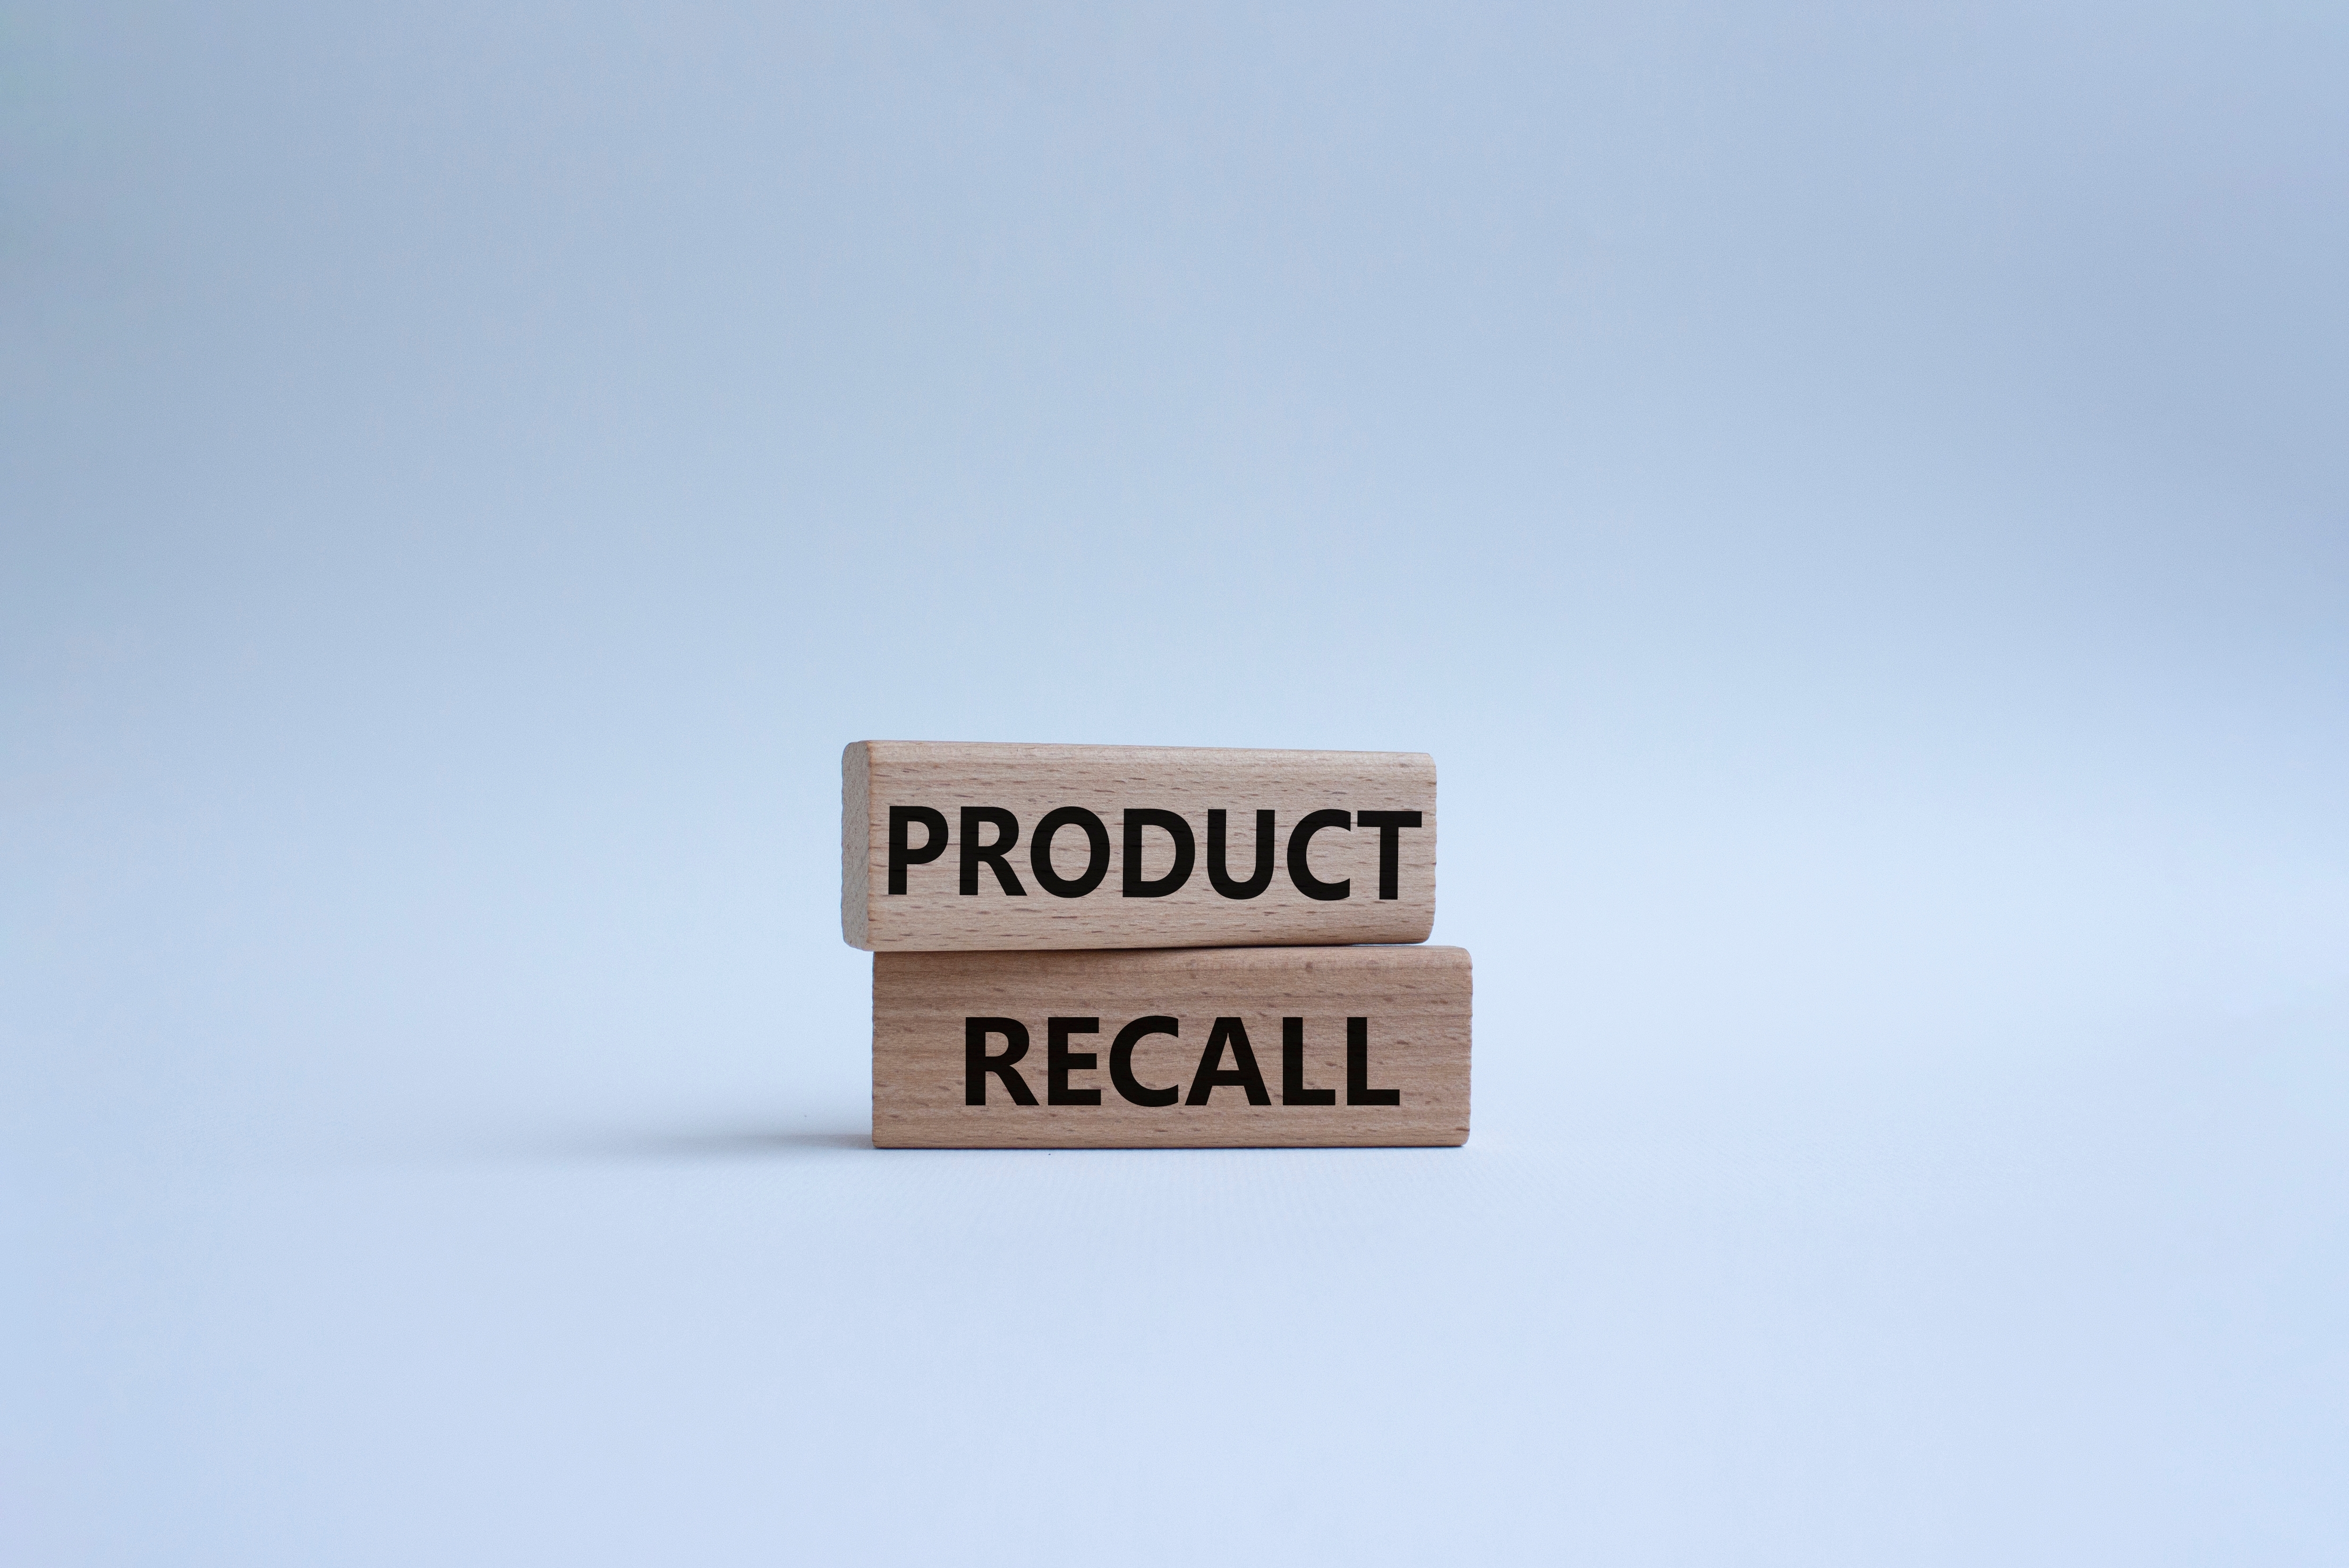 What to do if your products are recalled